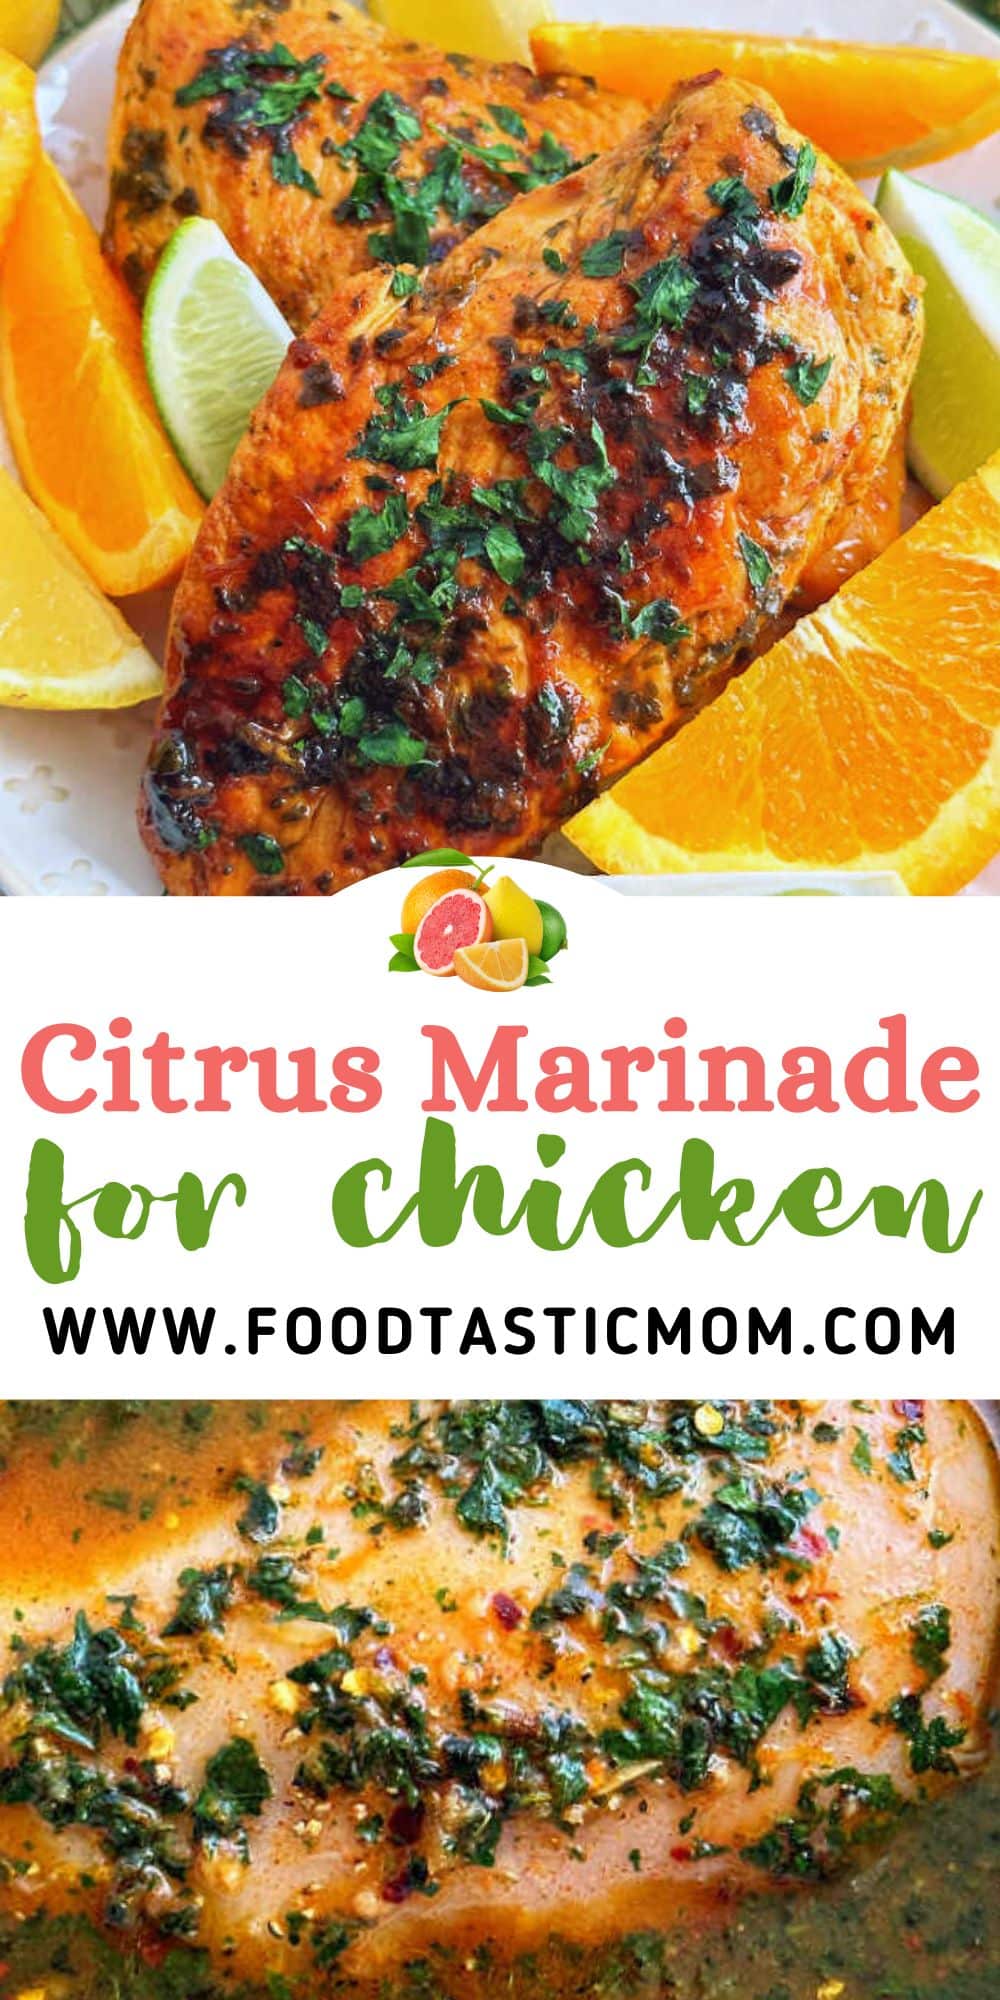 Simple ingredients combine to make the best citrus marinade for chicken, plus a secret ingredient for extra juicy boneless chicken breasts. via @foodtasticmom